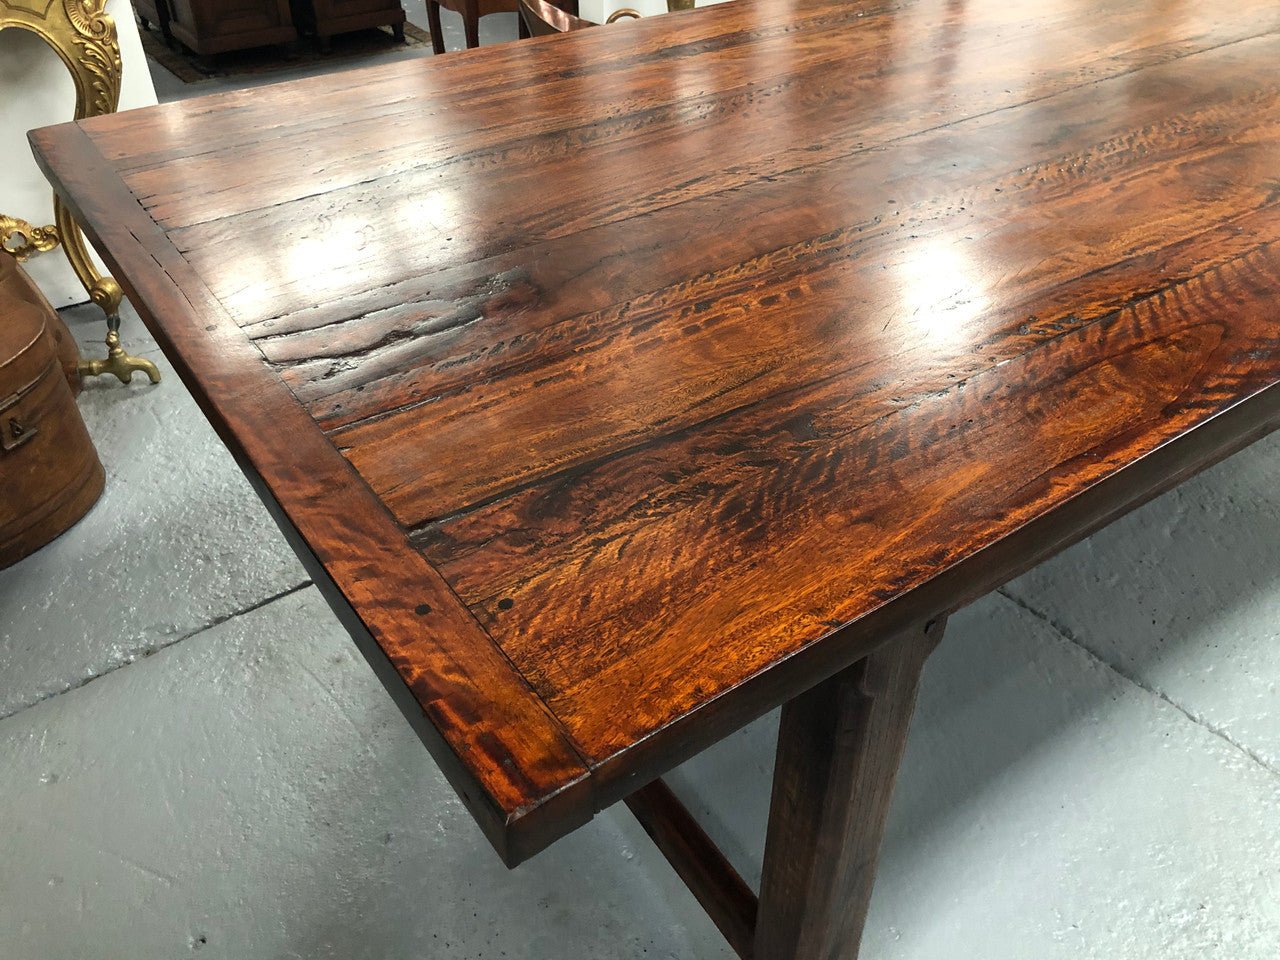 French style reclaimed timber Farmhouse table. Made from reclaimed Red Gum timber this table is very solid and has a great width at 105 cm. It is in very good original detailed condition.